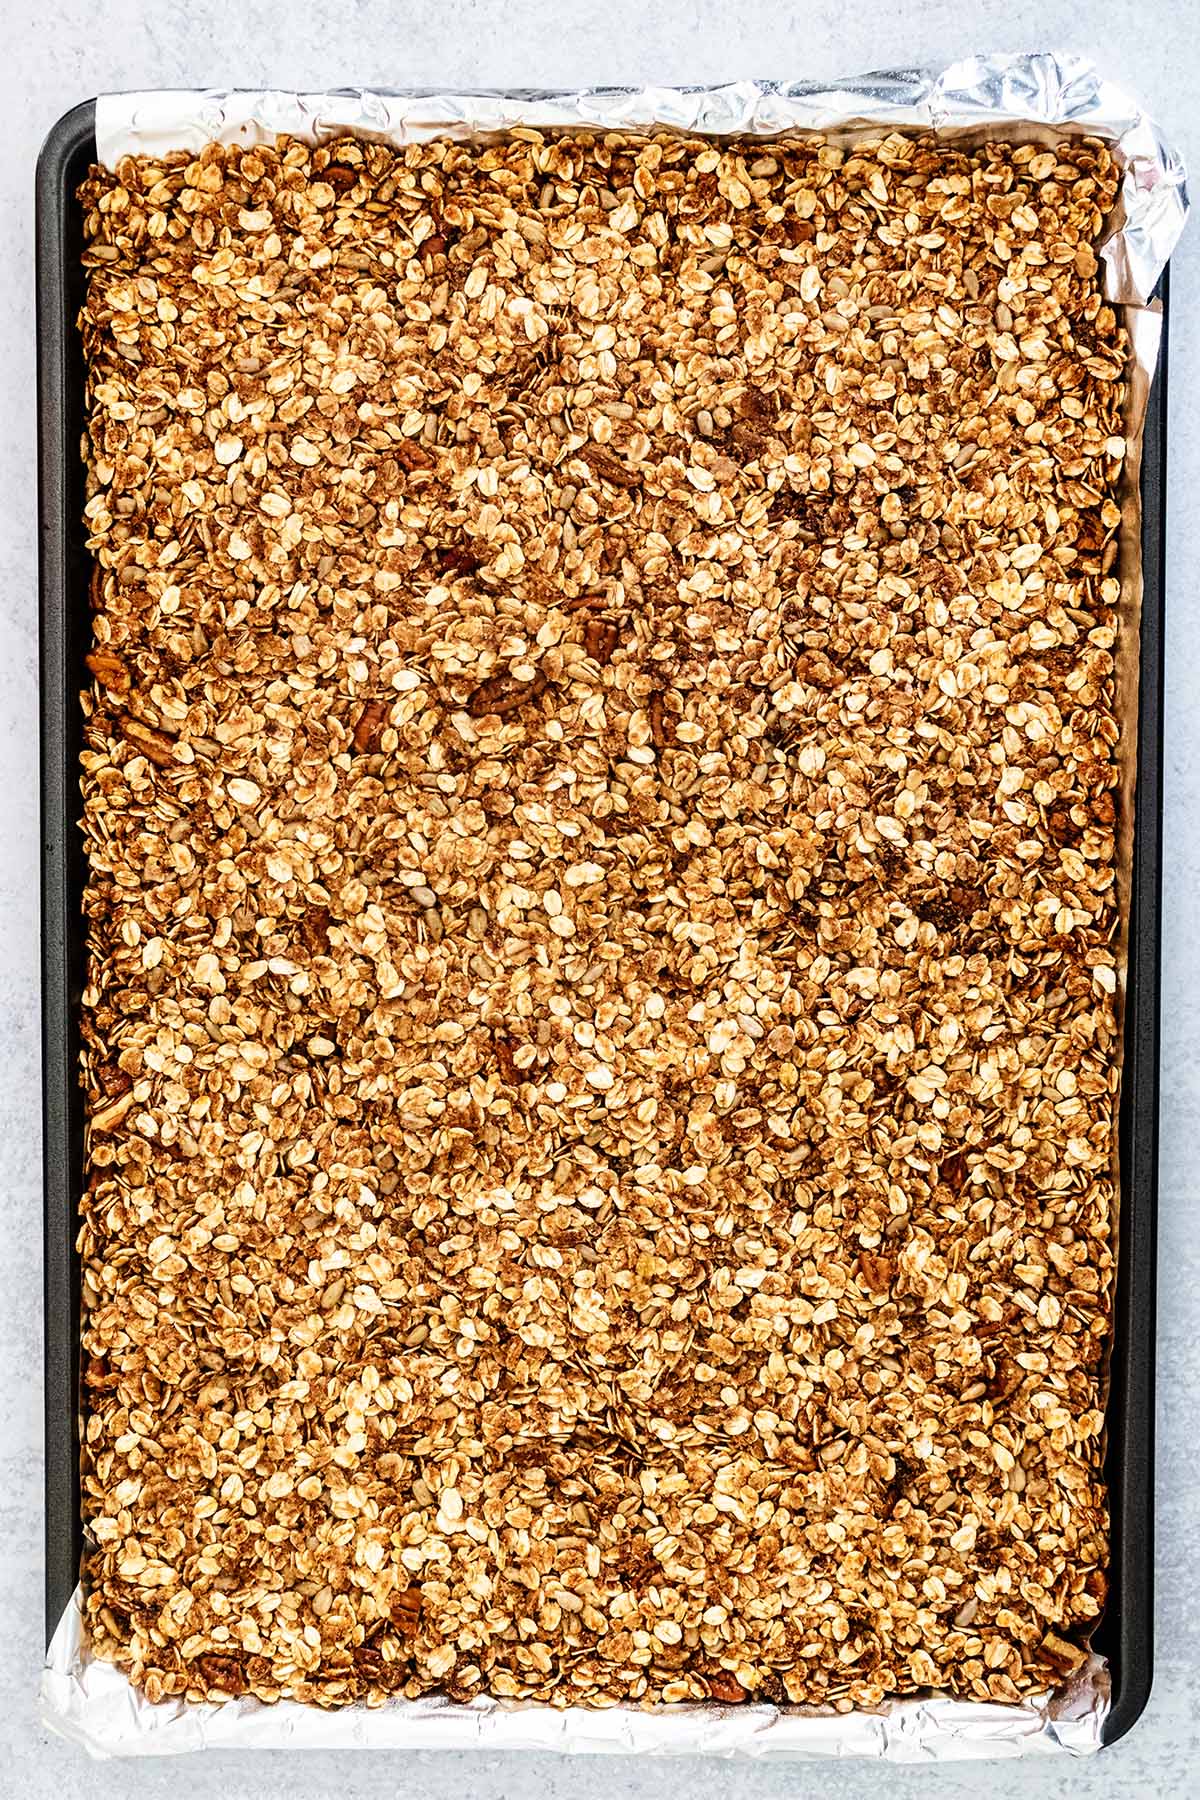 Unbaked cinnamon granola spread onto a foil-lined baking sheet.